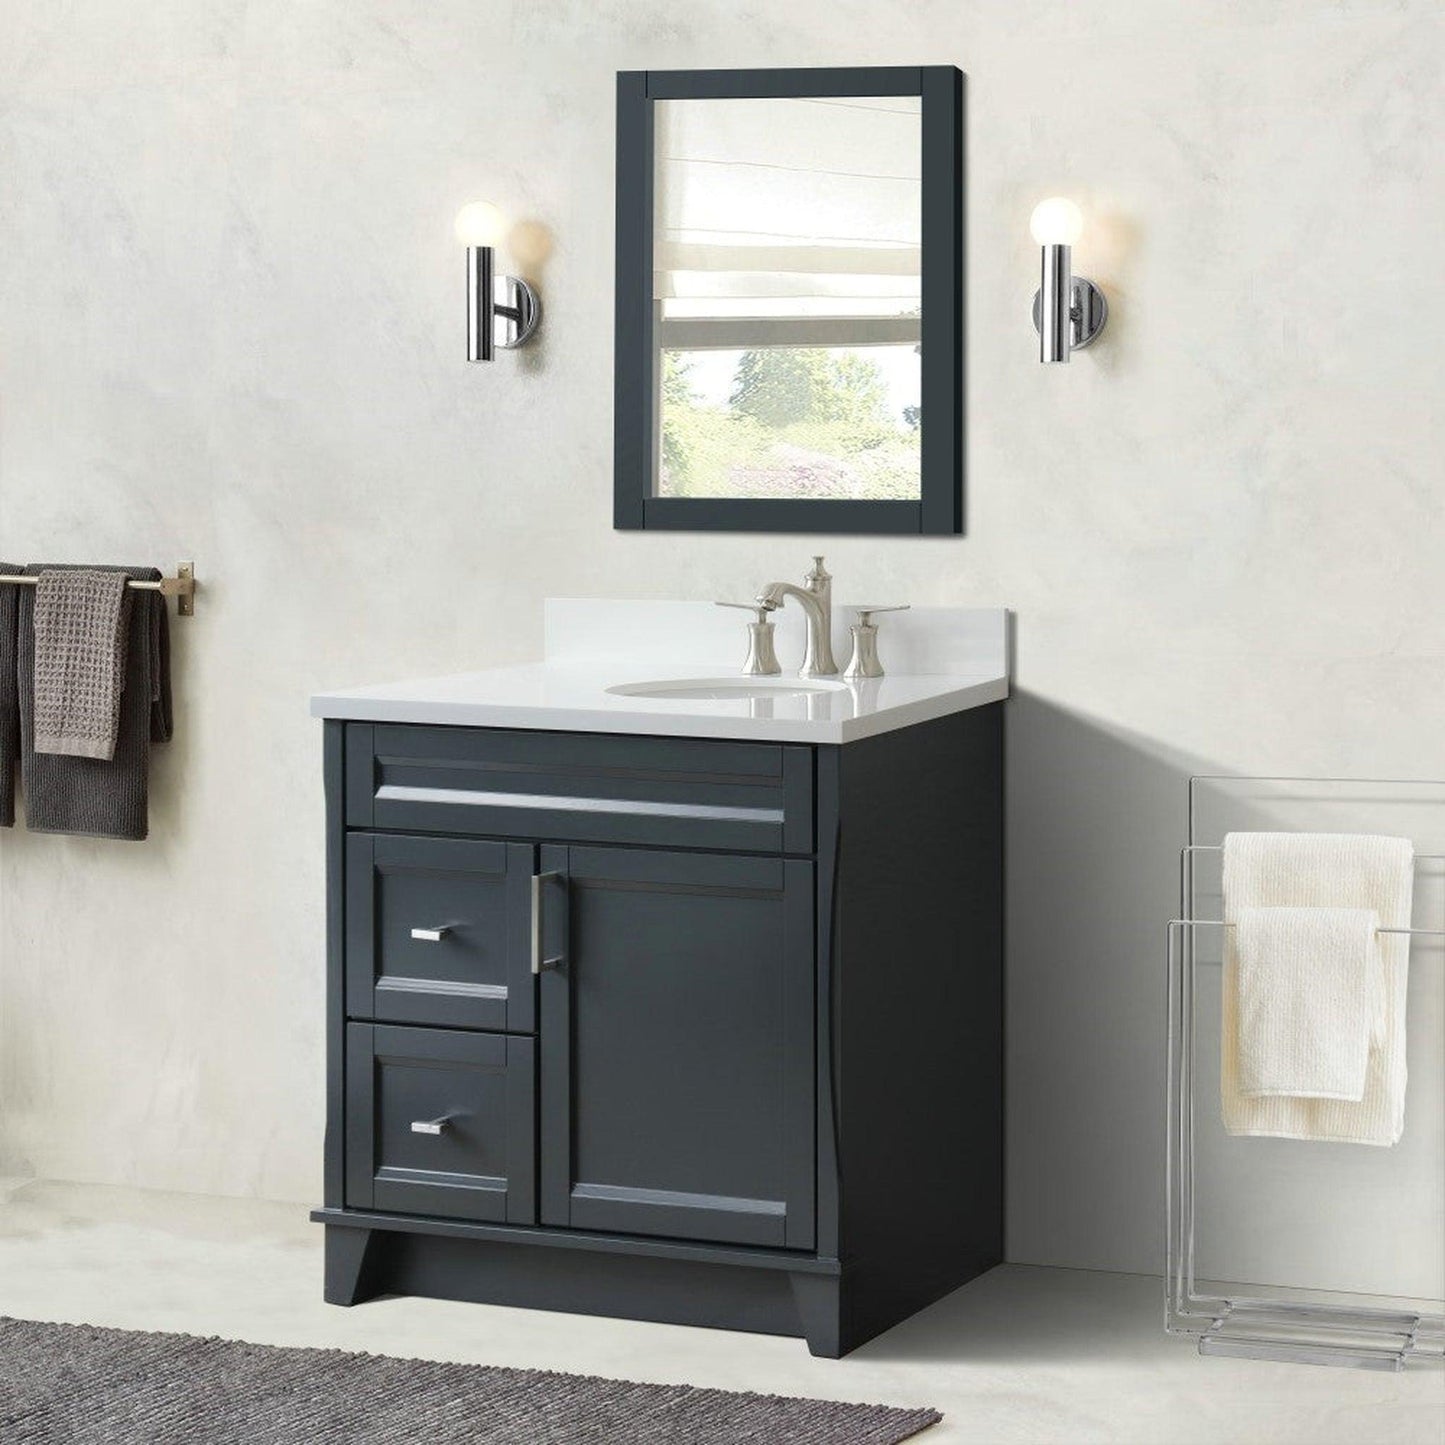 Bellaterra Home Terni 37" 1-Door 2-Drawer Dark Gray Freestanding Vanity Set With Ceramic Right Offset Undermount Oval Sink and White Quartz Top, and Right Door Base